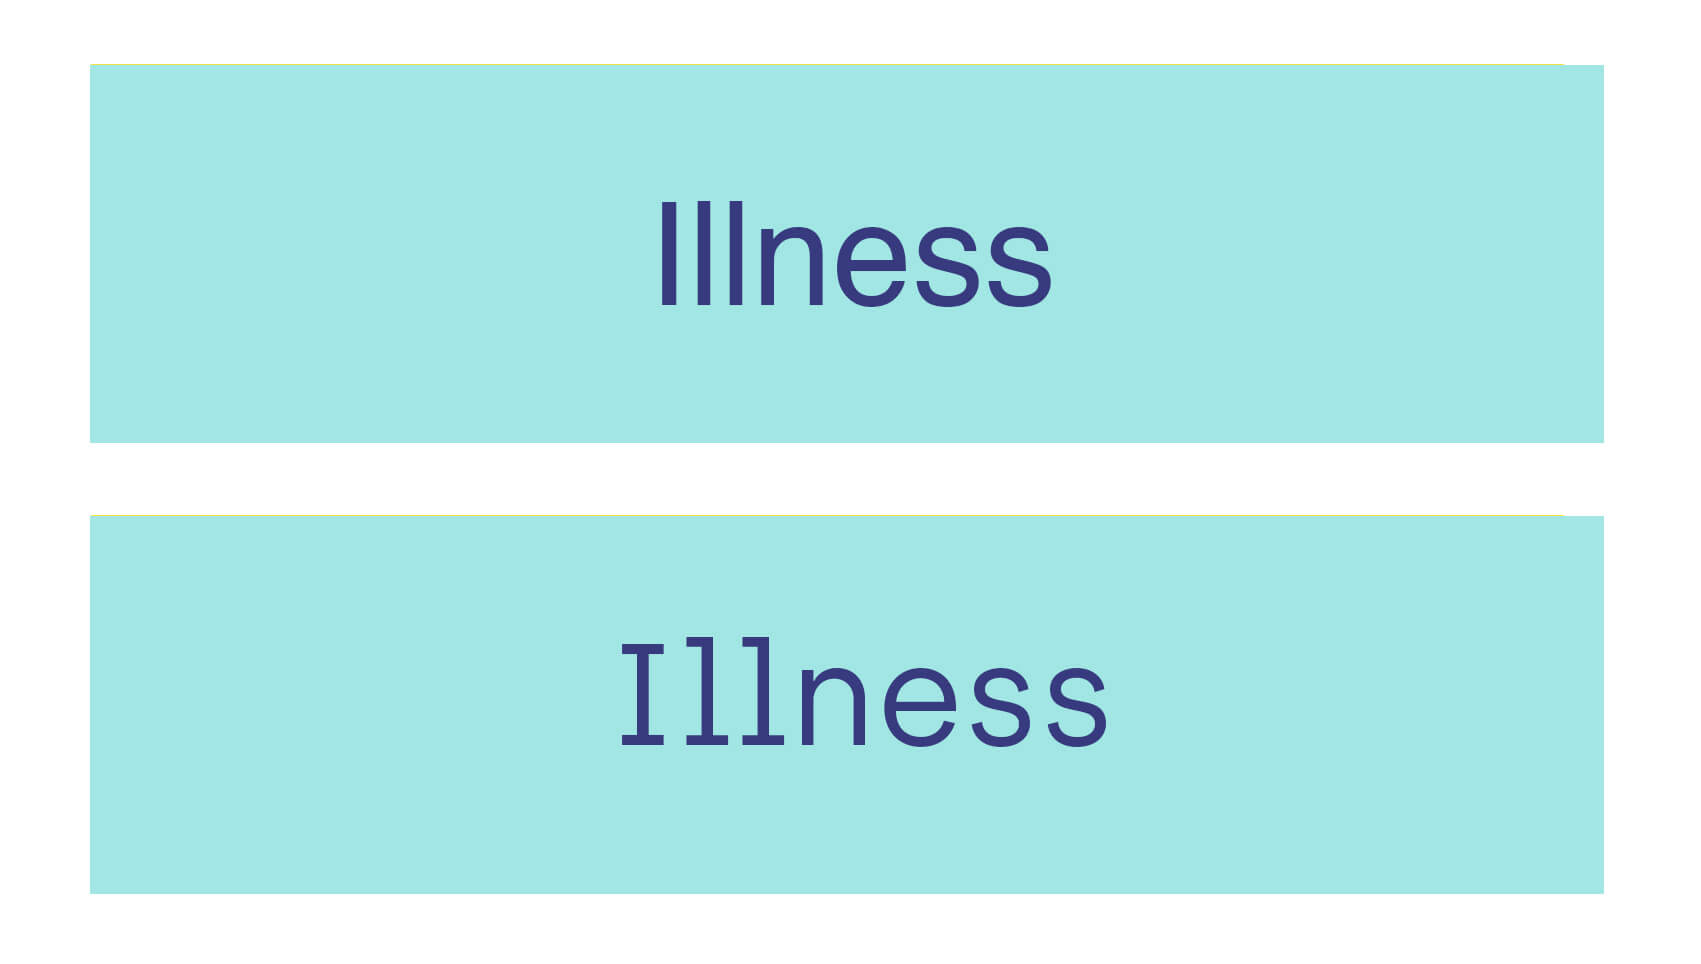 accessibility example using the word Illness